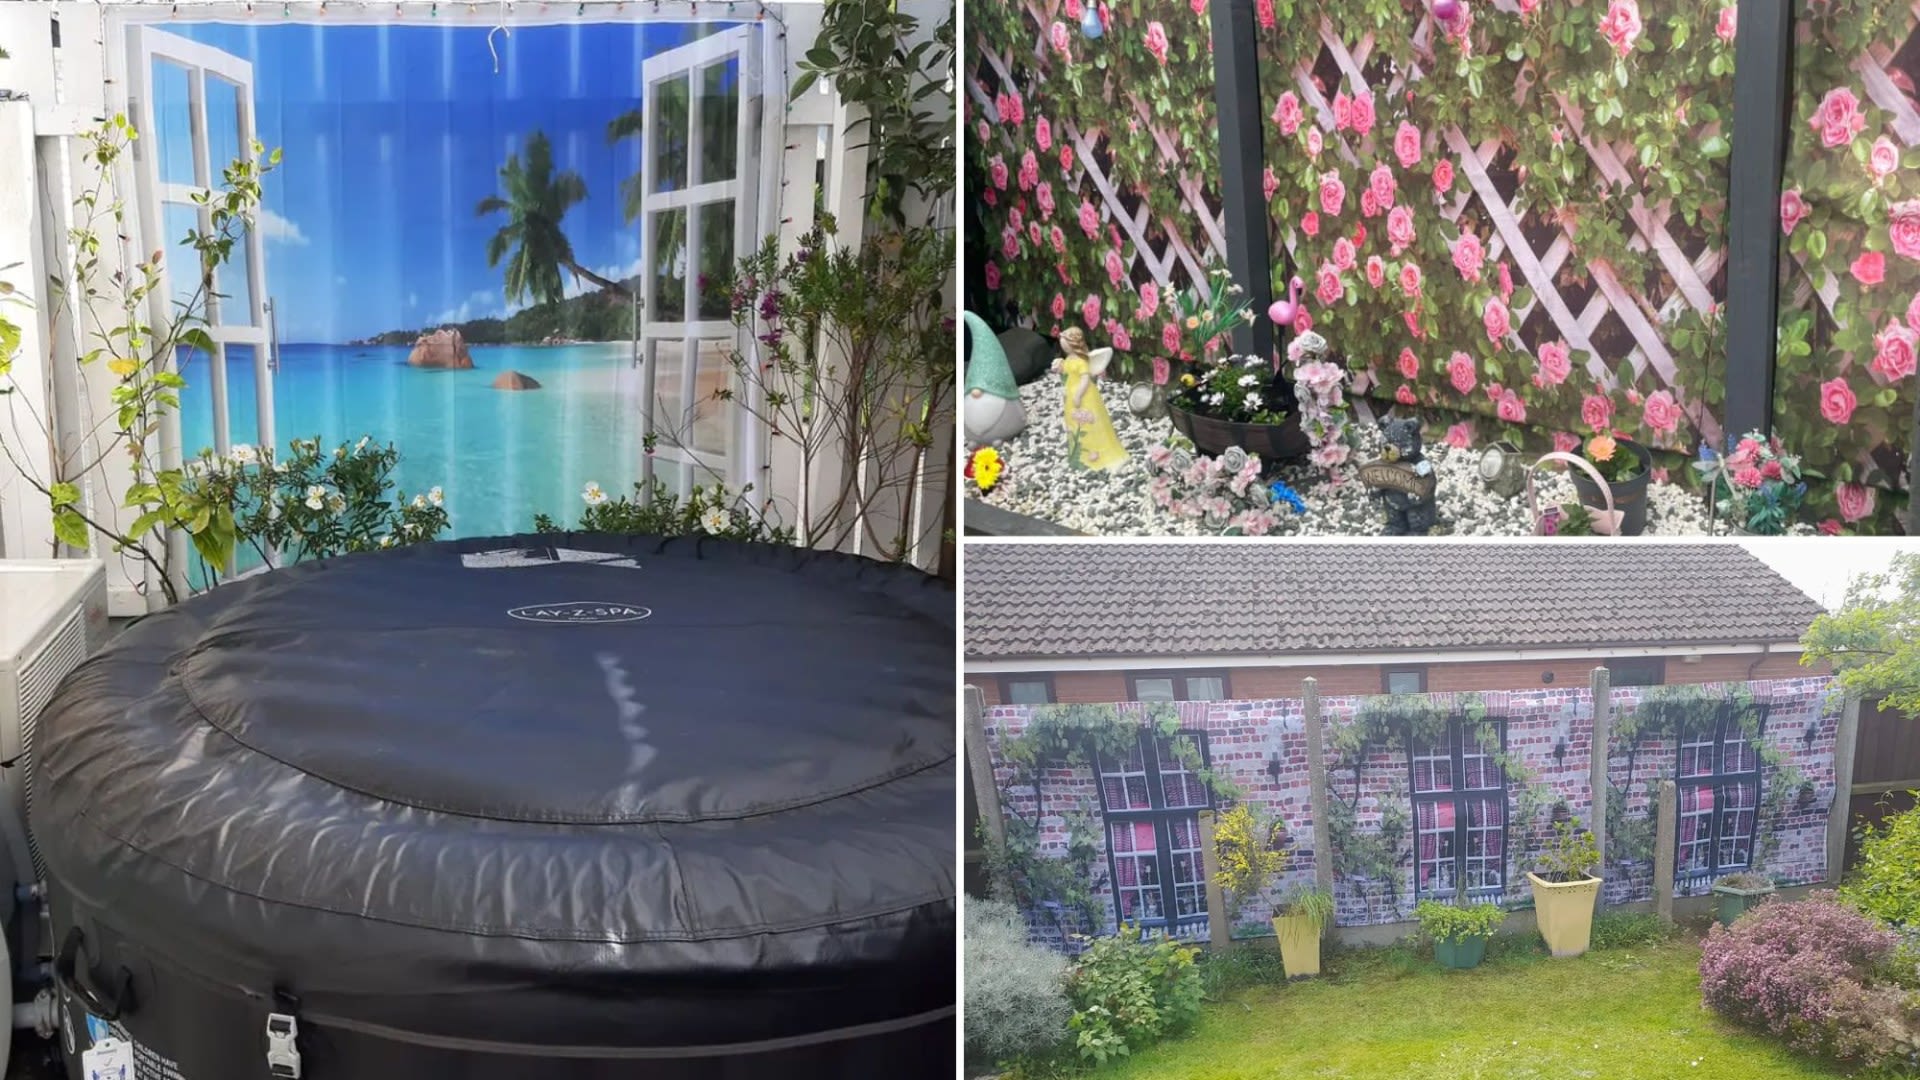 Garden lovers hit back at claim shower curtain fence trend is ‘tacky’